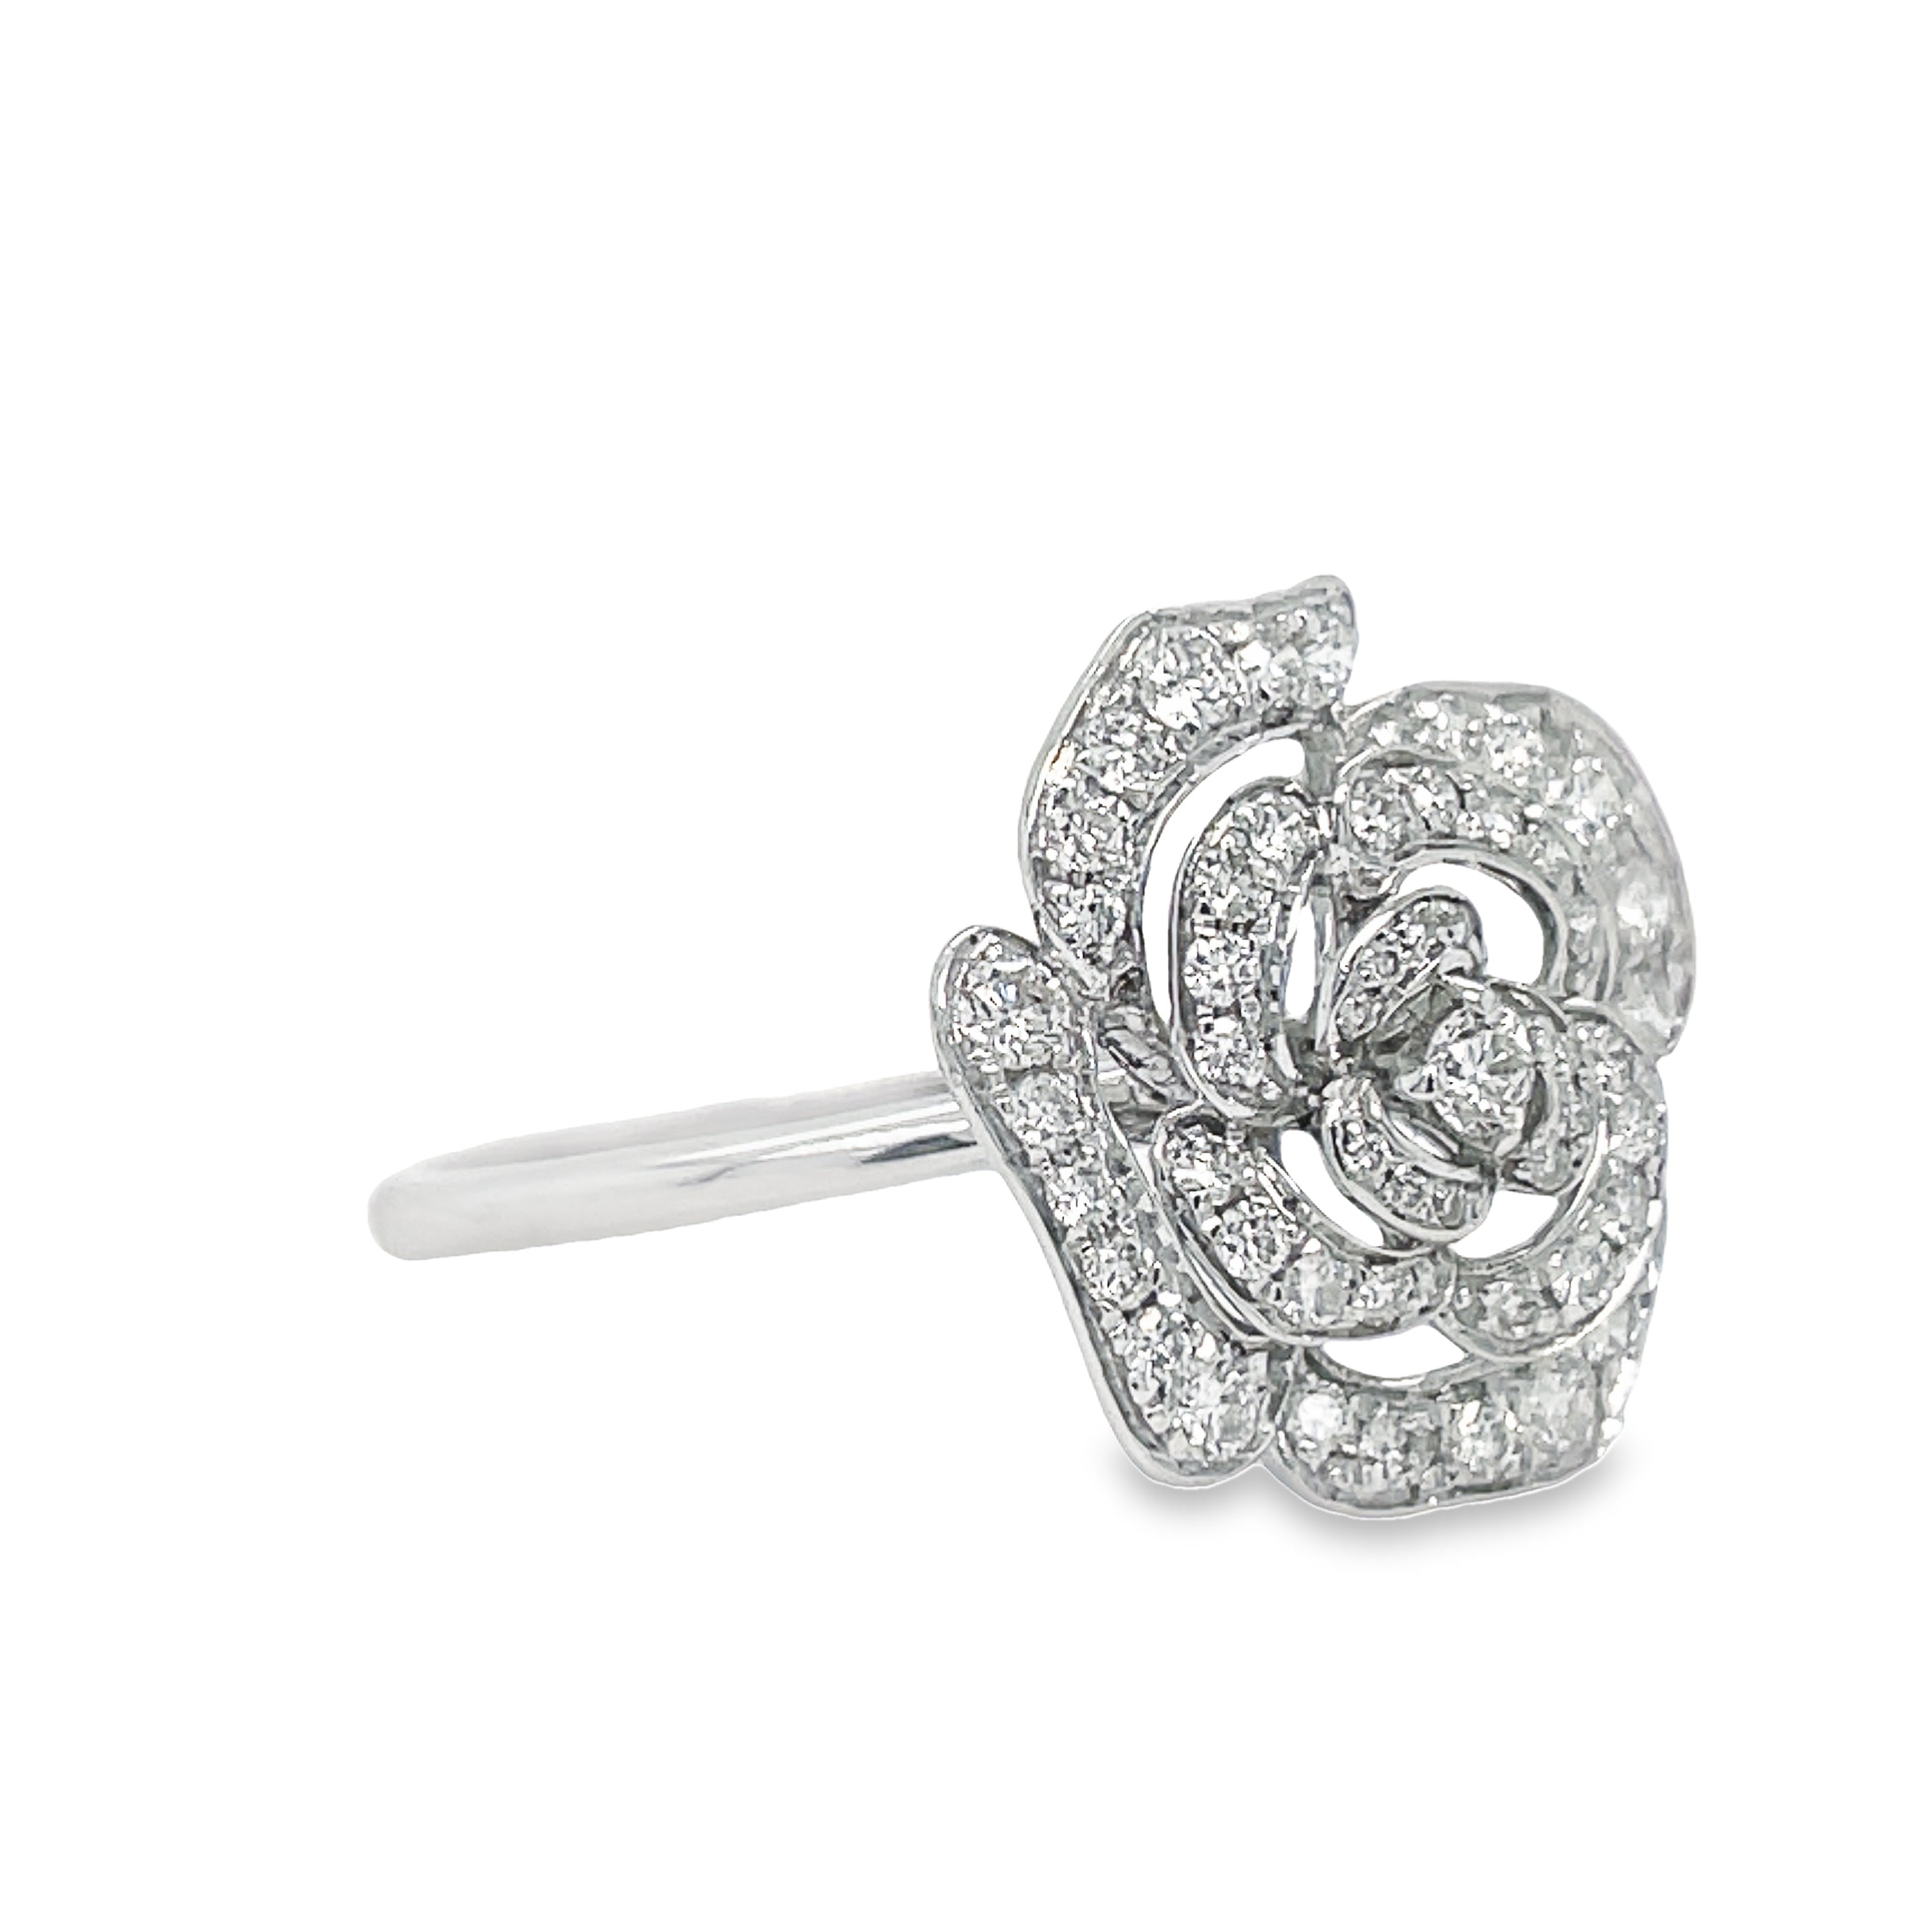 This stunning ring brings a unique sense of luxury to any look. Crafted from 18k white gold and featuring round diamond 0.50 cts, this ring adds the perfect finishing touch. 